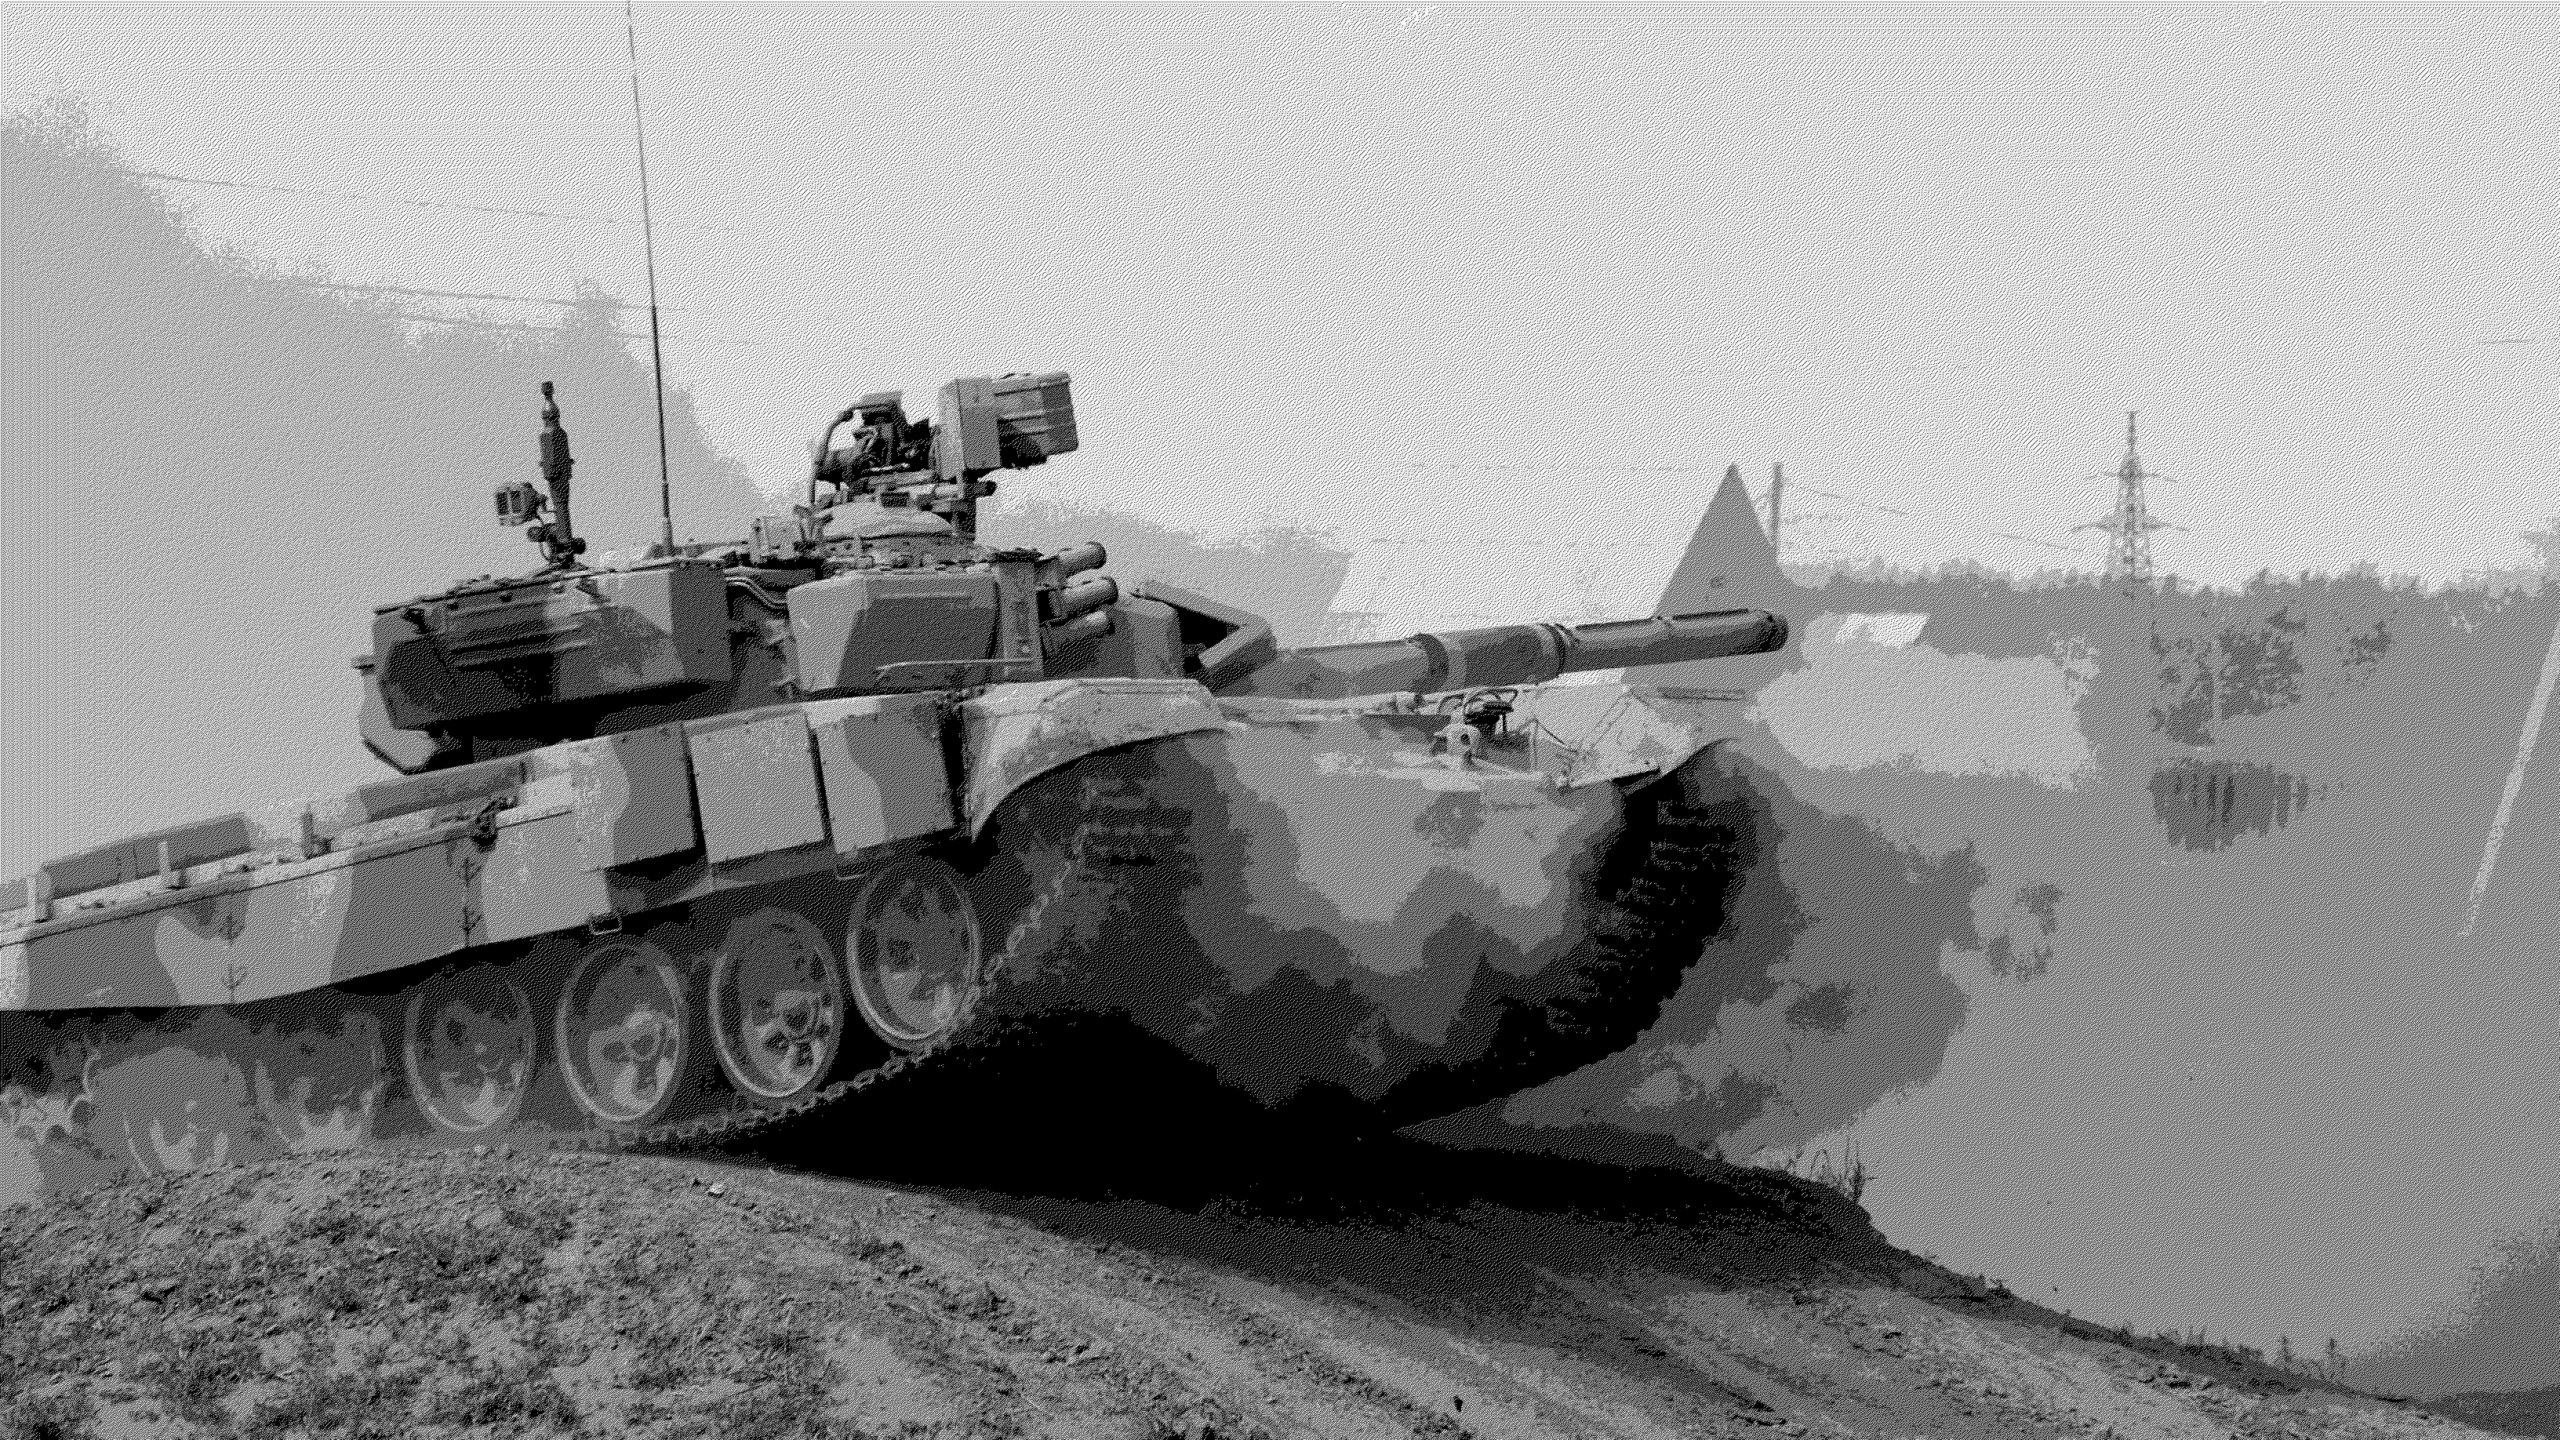 General 2560x1440 tank artwork vehicle military gray military vehicle T-72 Russian/Soviet aircraft